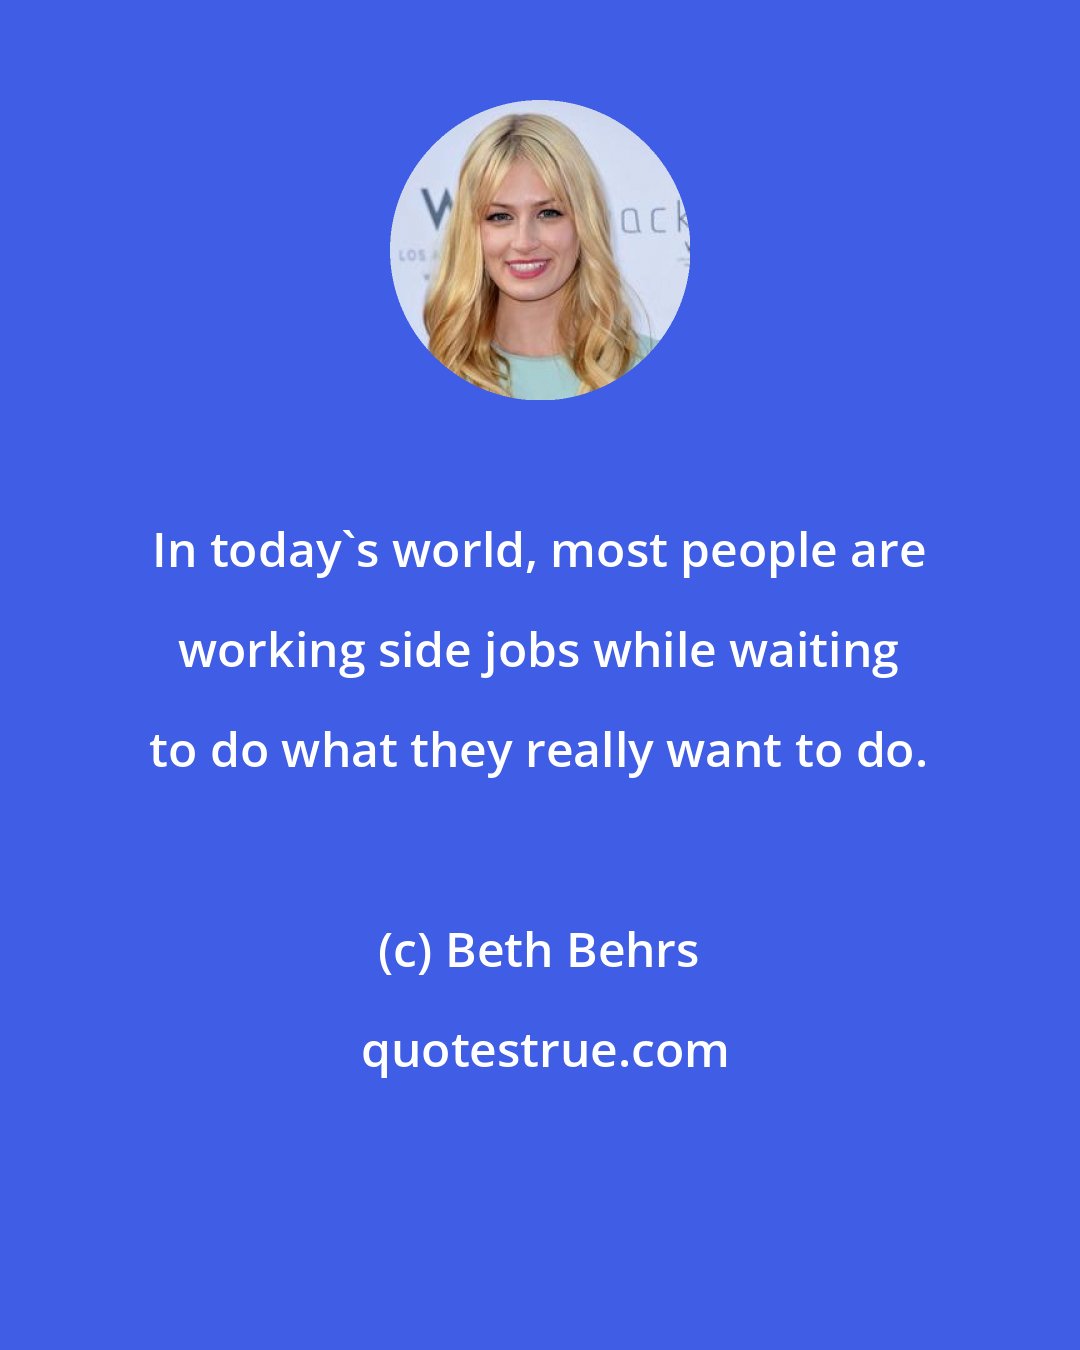 Beth Behrs: In today's world, most people are working side jobs while waiting to do what they really want to do.